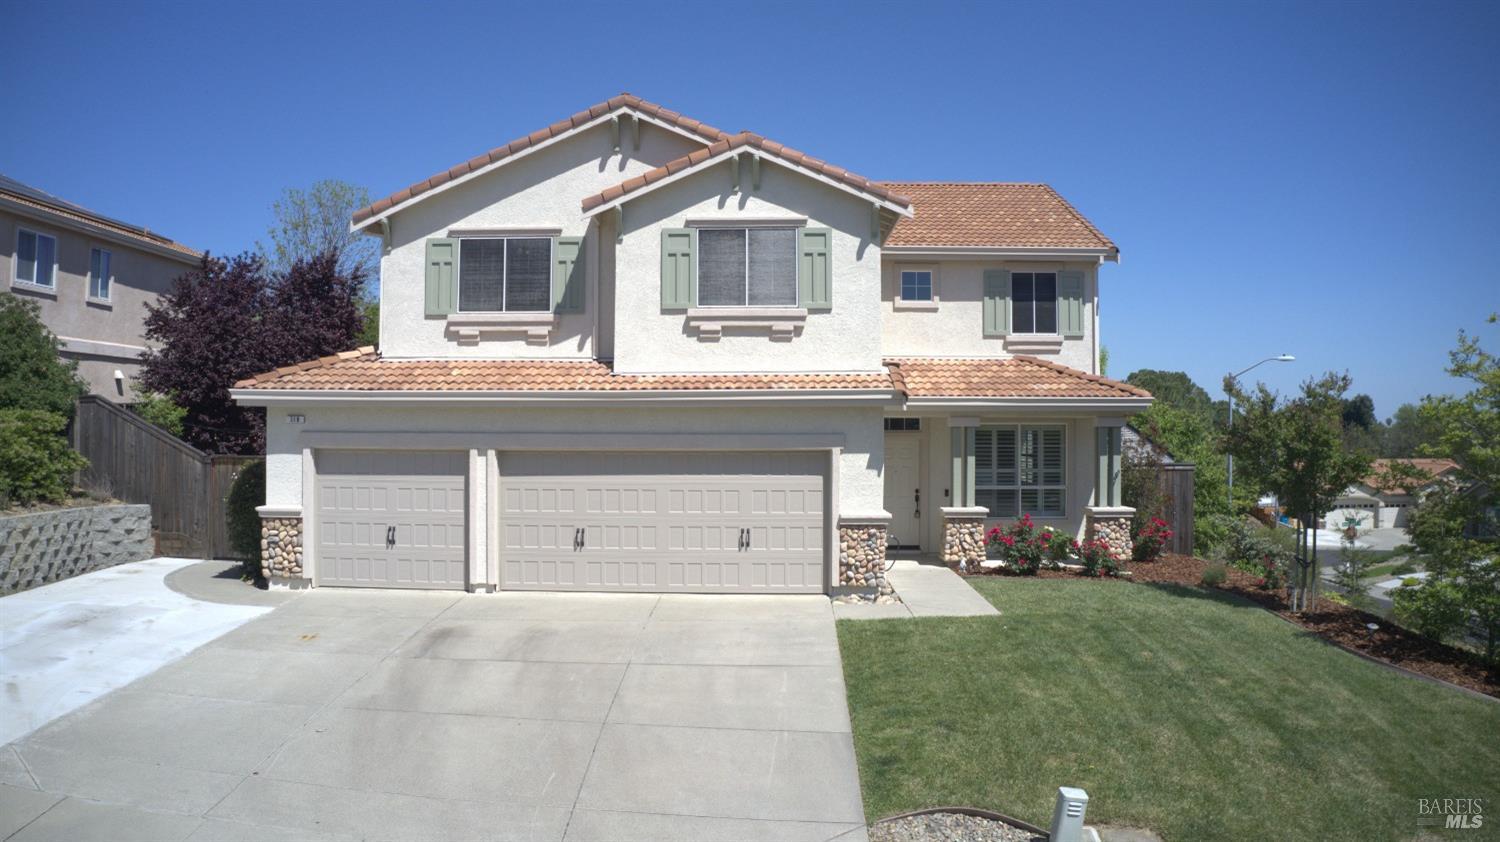 Welcome to 319 Old Rocky Circle in Vacaville! Come view this magnificent 5 bedroom 3 bath Browns Val